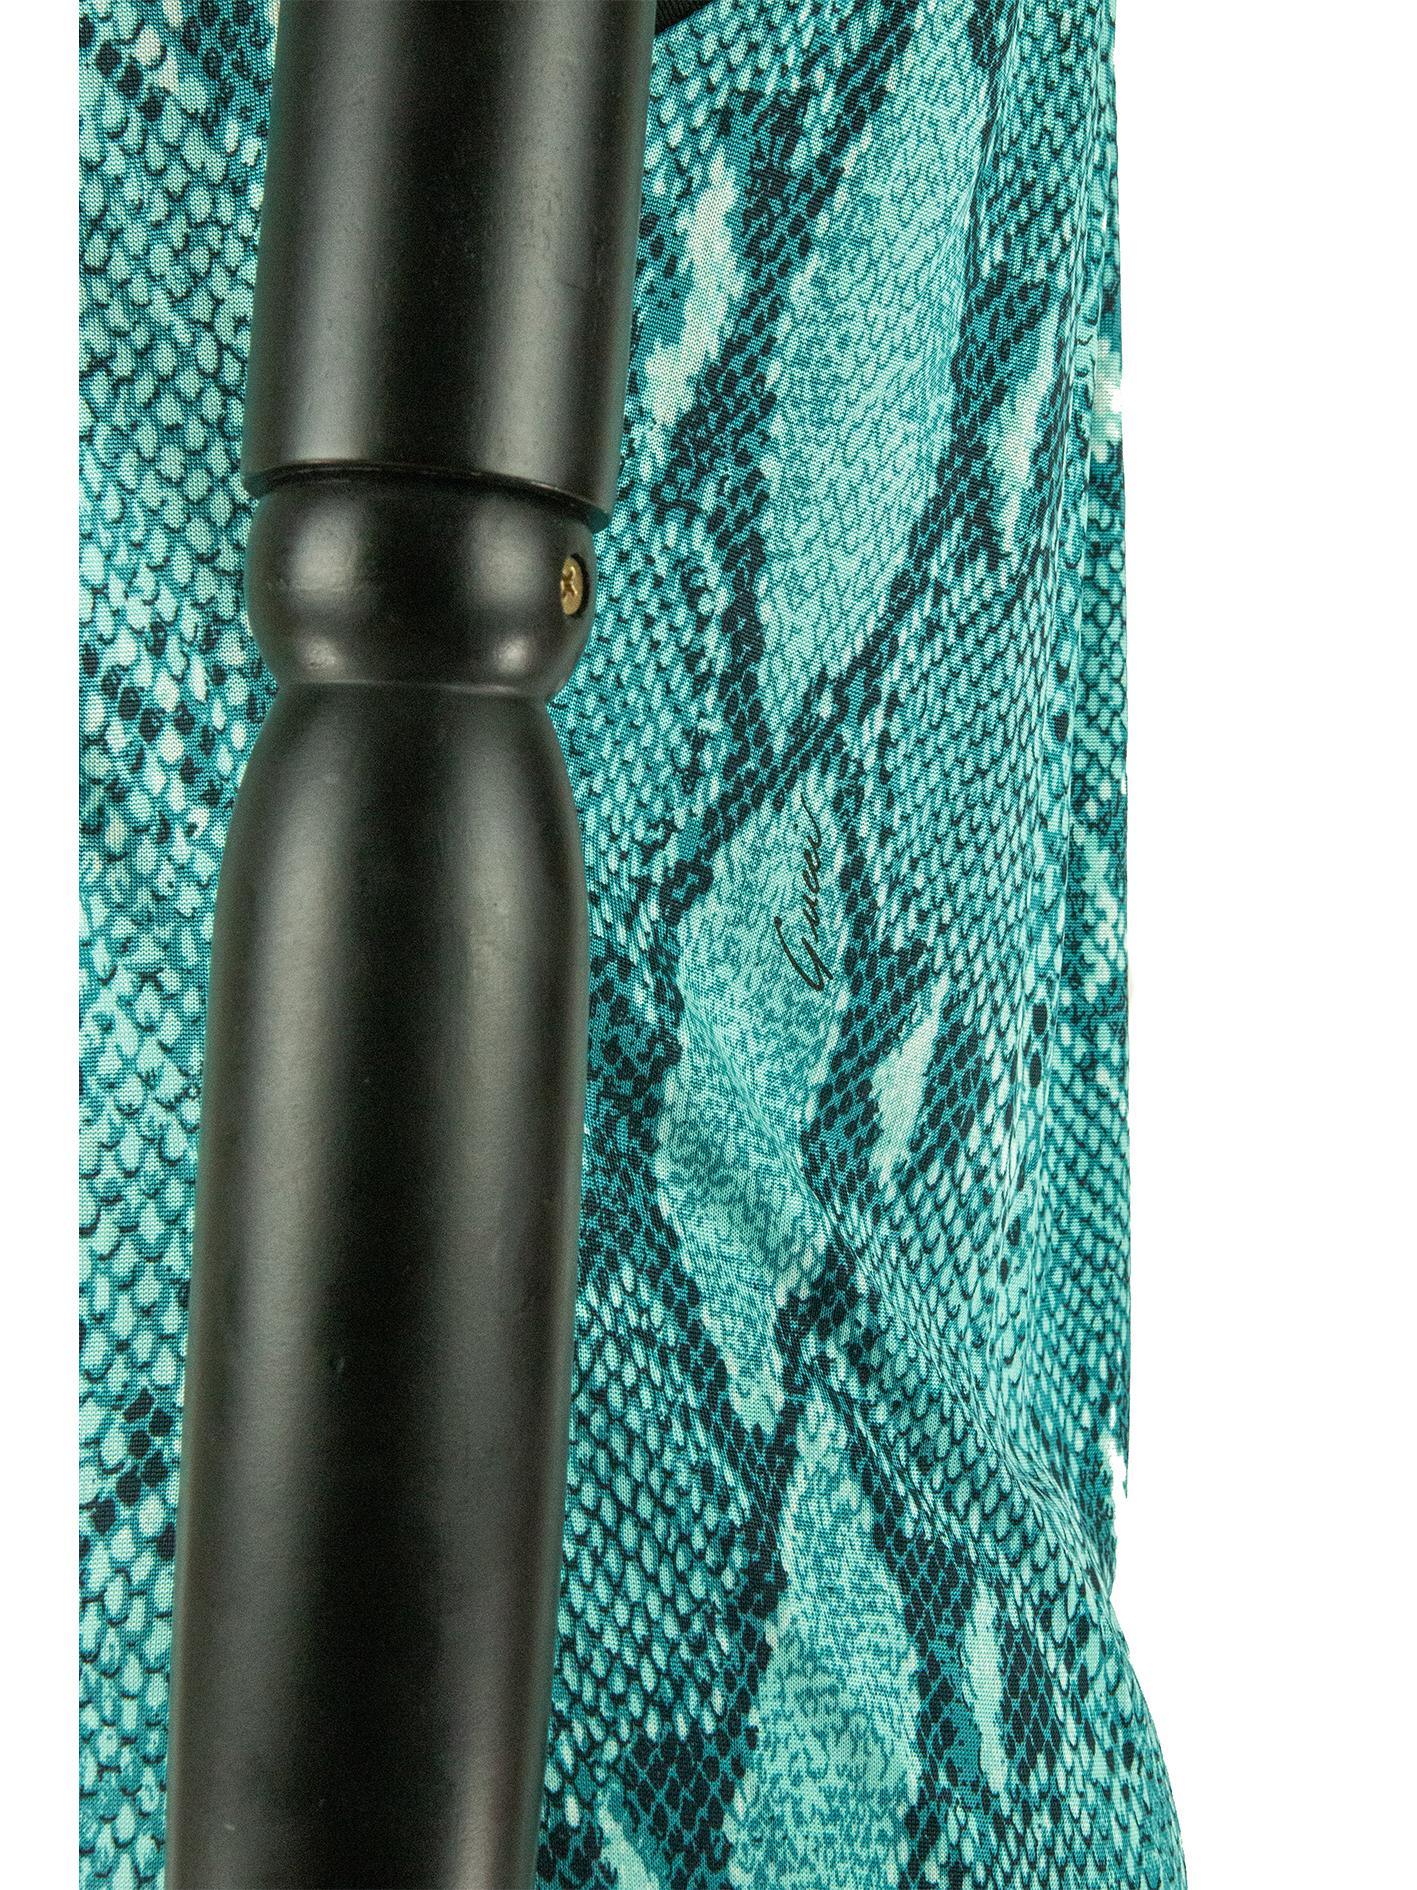 Spring 2000 Gucci by Tom Ford Green, Turquoise And Black Snakeskin Print Dress In Good Condition For Sale In London, GB